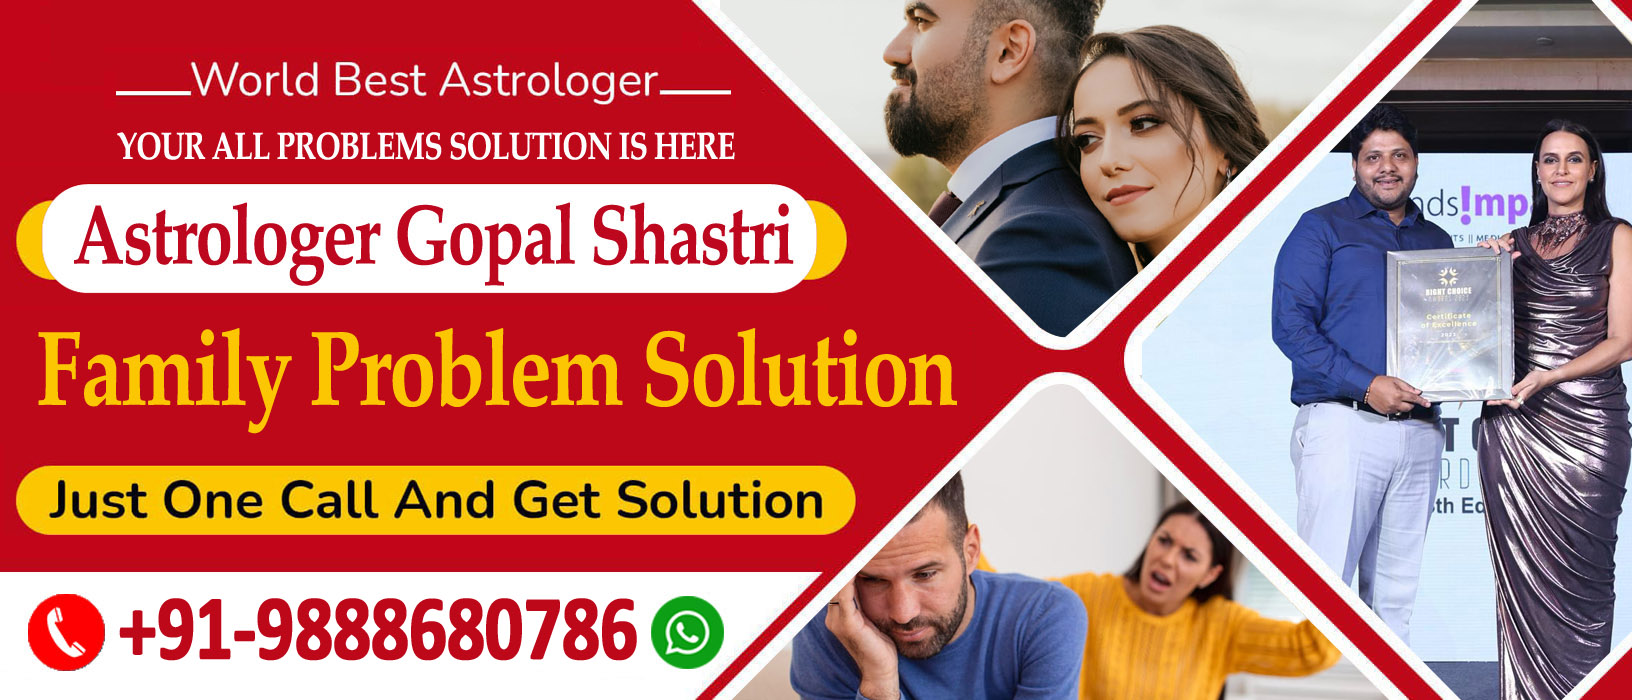 Marriage Solution By Astrologer Gopal Shastri